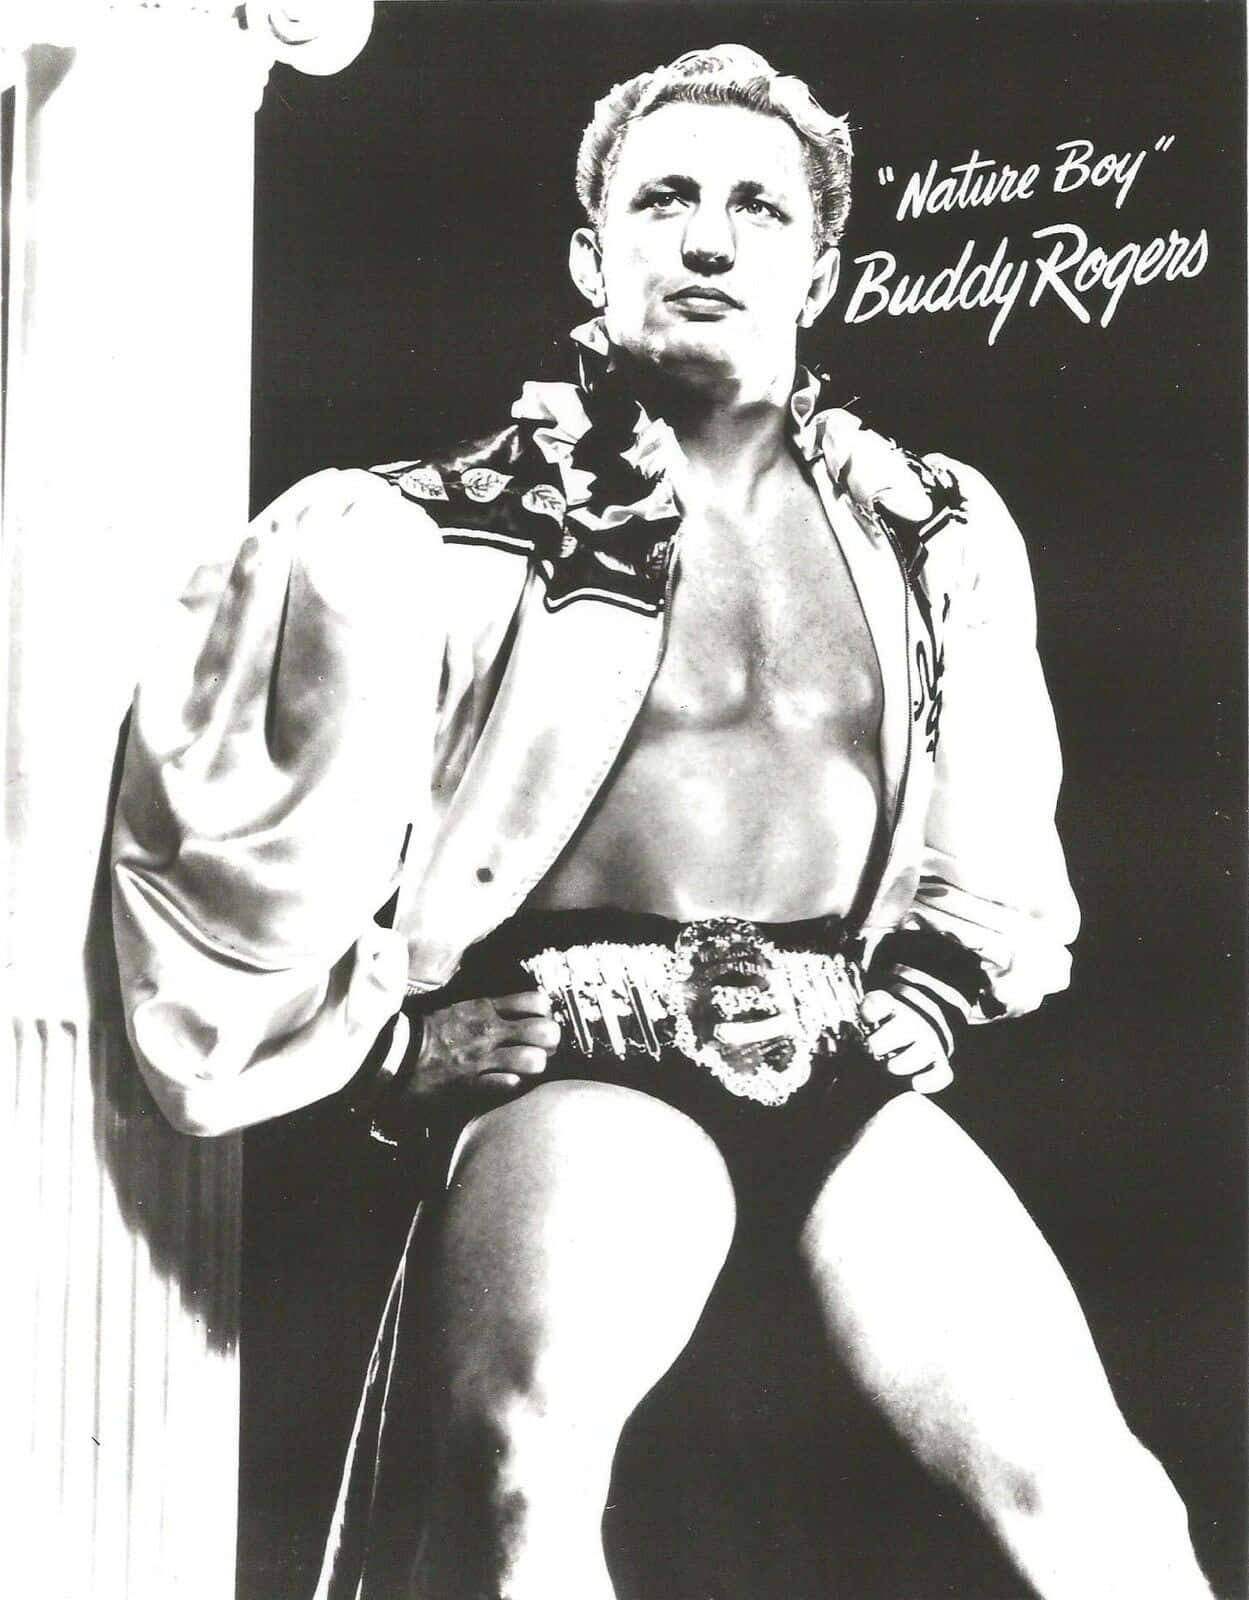 "Buddy Rogers - The Original 'Nature Boy' of Professional Wrestling" Wallpaper